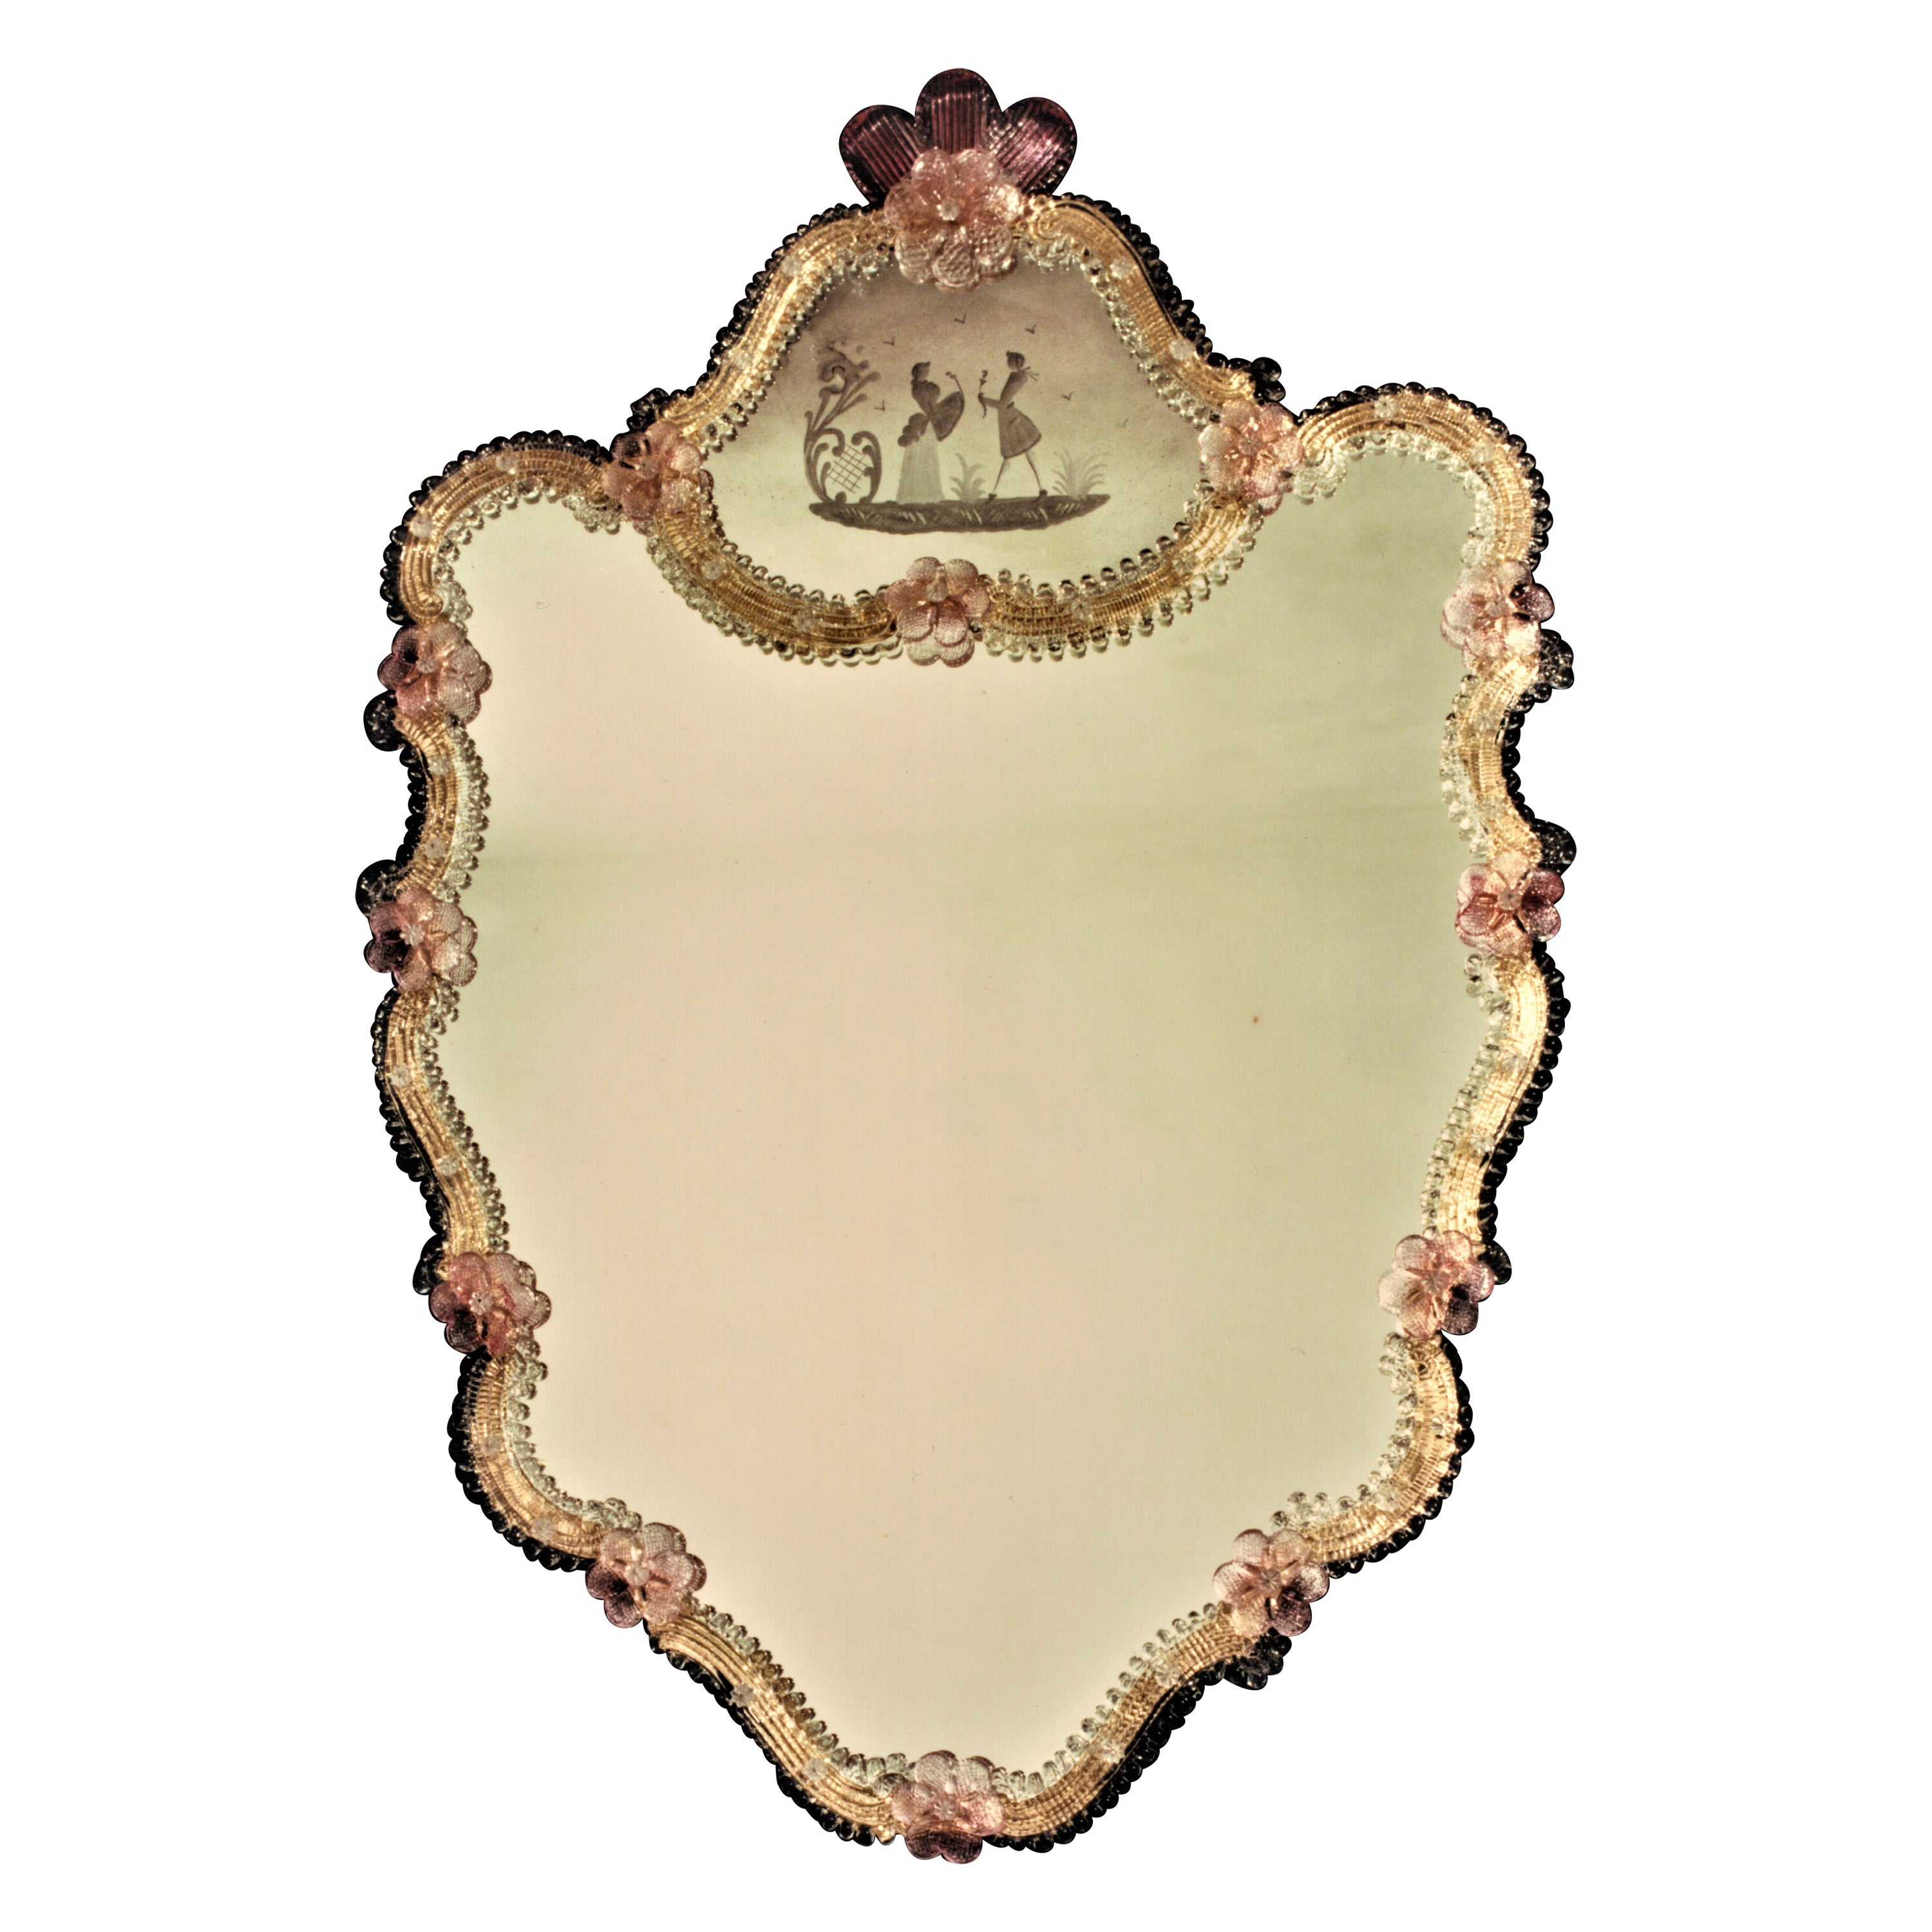 Murano glass mirror in Venetian style, made by Fratelli Tosi,
composed of a crystal frame on a gold background in Murano glass, embellished with Ruby colored flowers and leaves, the upper part of the mirror is engraved with a classic Venetian 